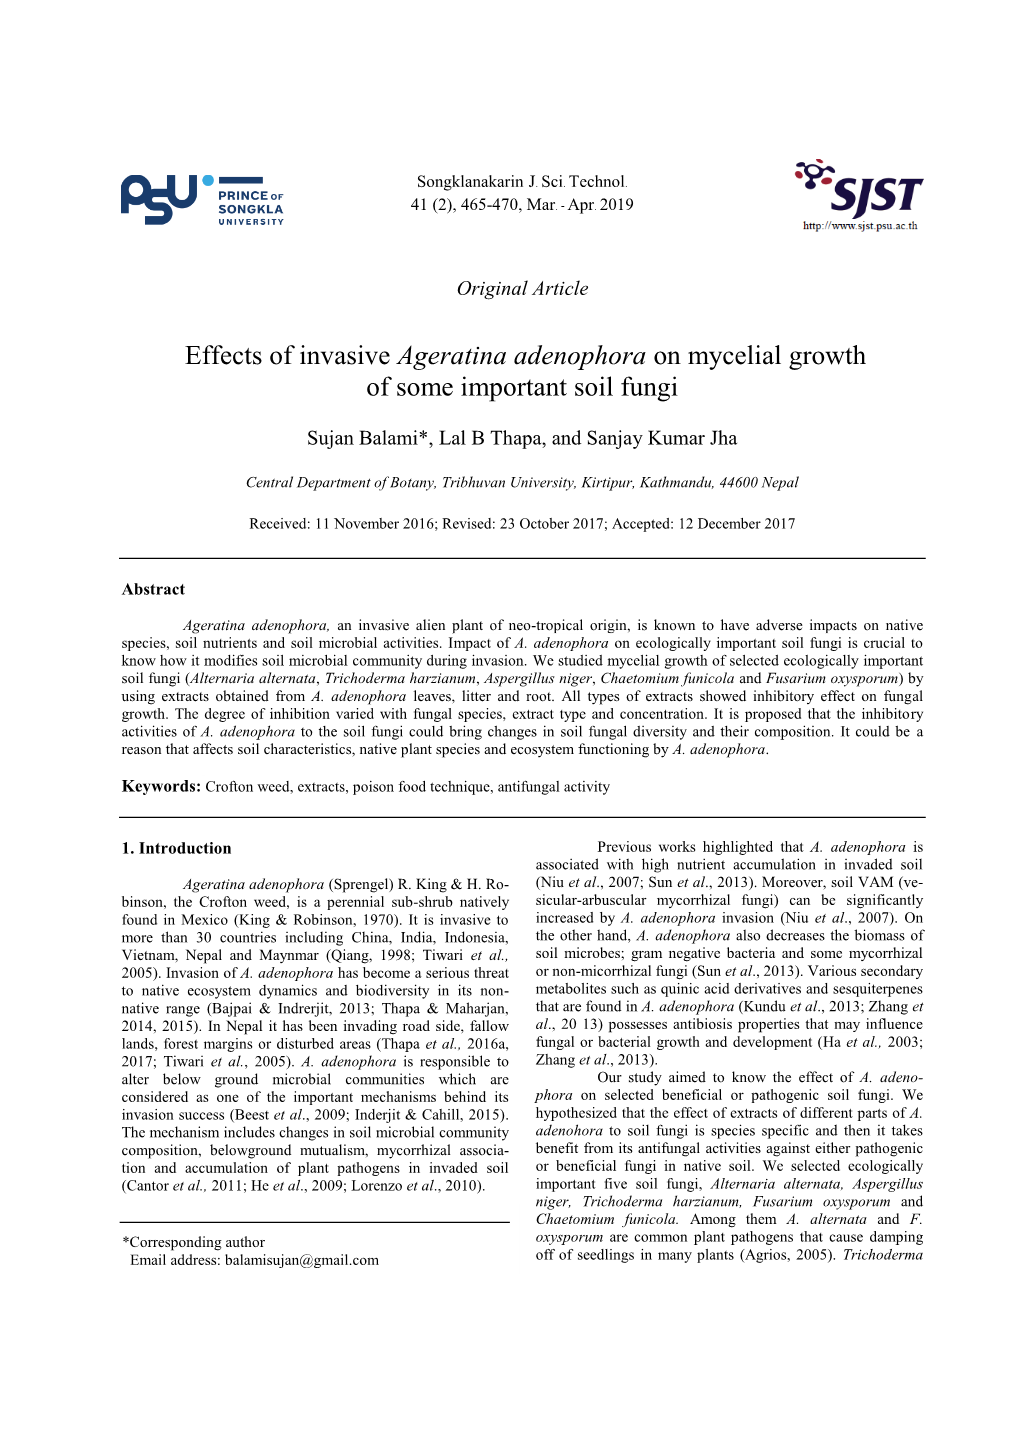 Effects of Invasive Ageratina Adenophora on Mycelial Growth of Some Important Soil Fungi